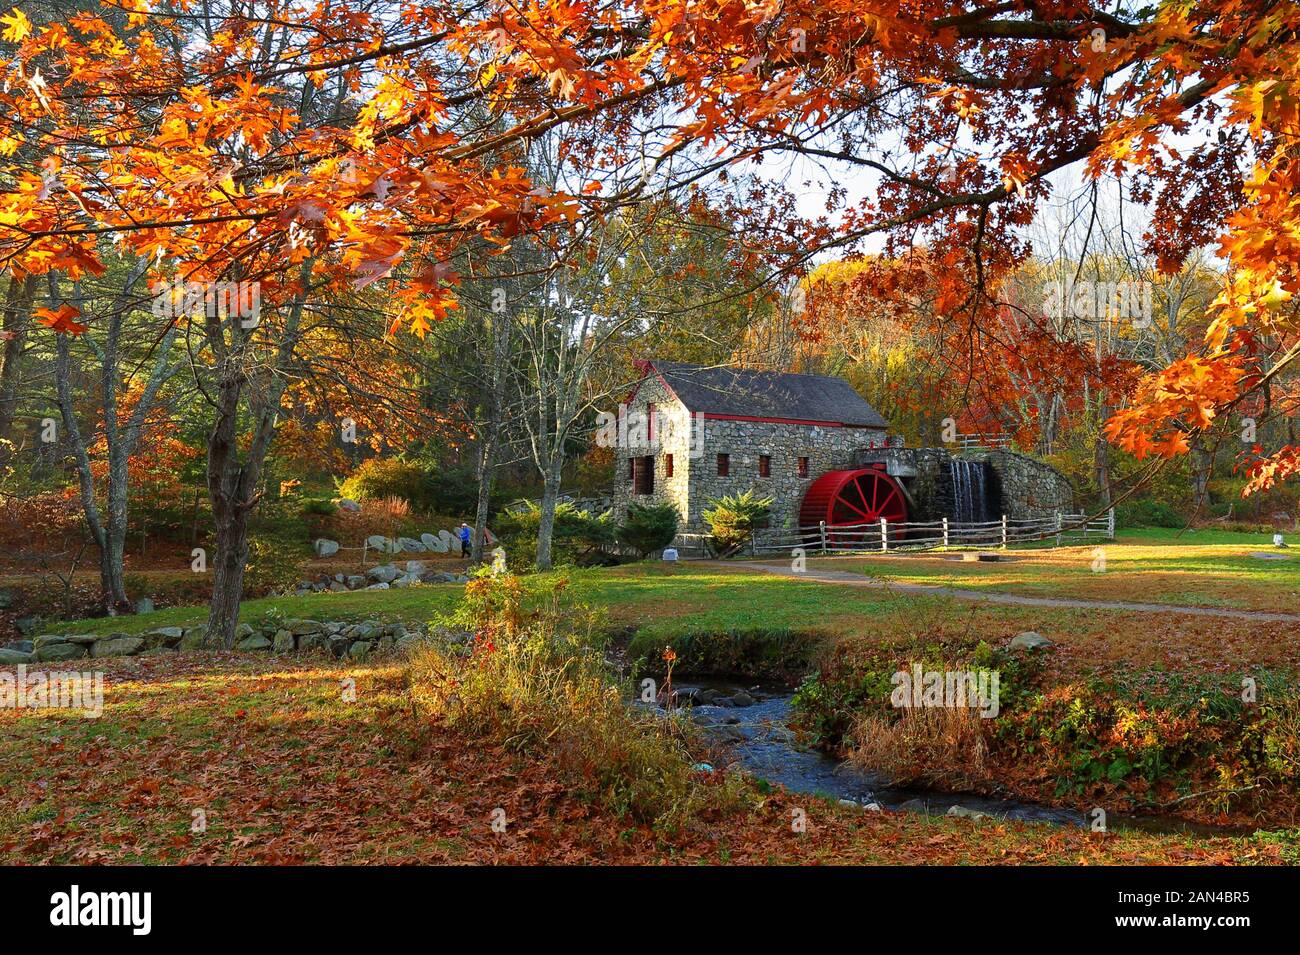 The Wayside Inn Grist Mill with water wheel and cascade water fall in Autumn. Stock Photo